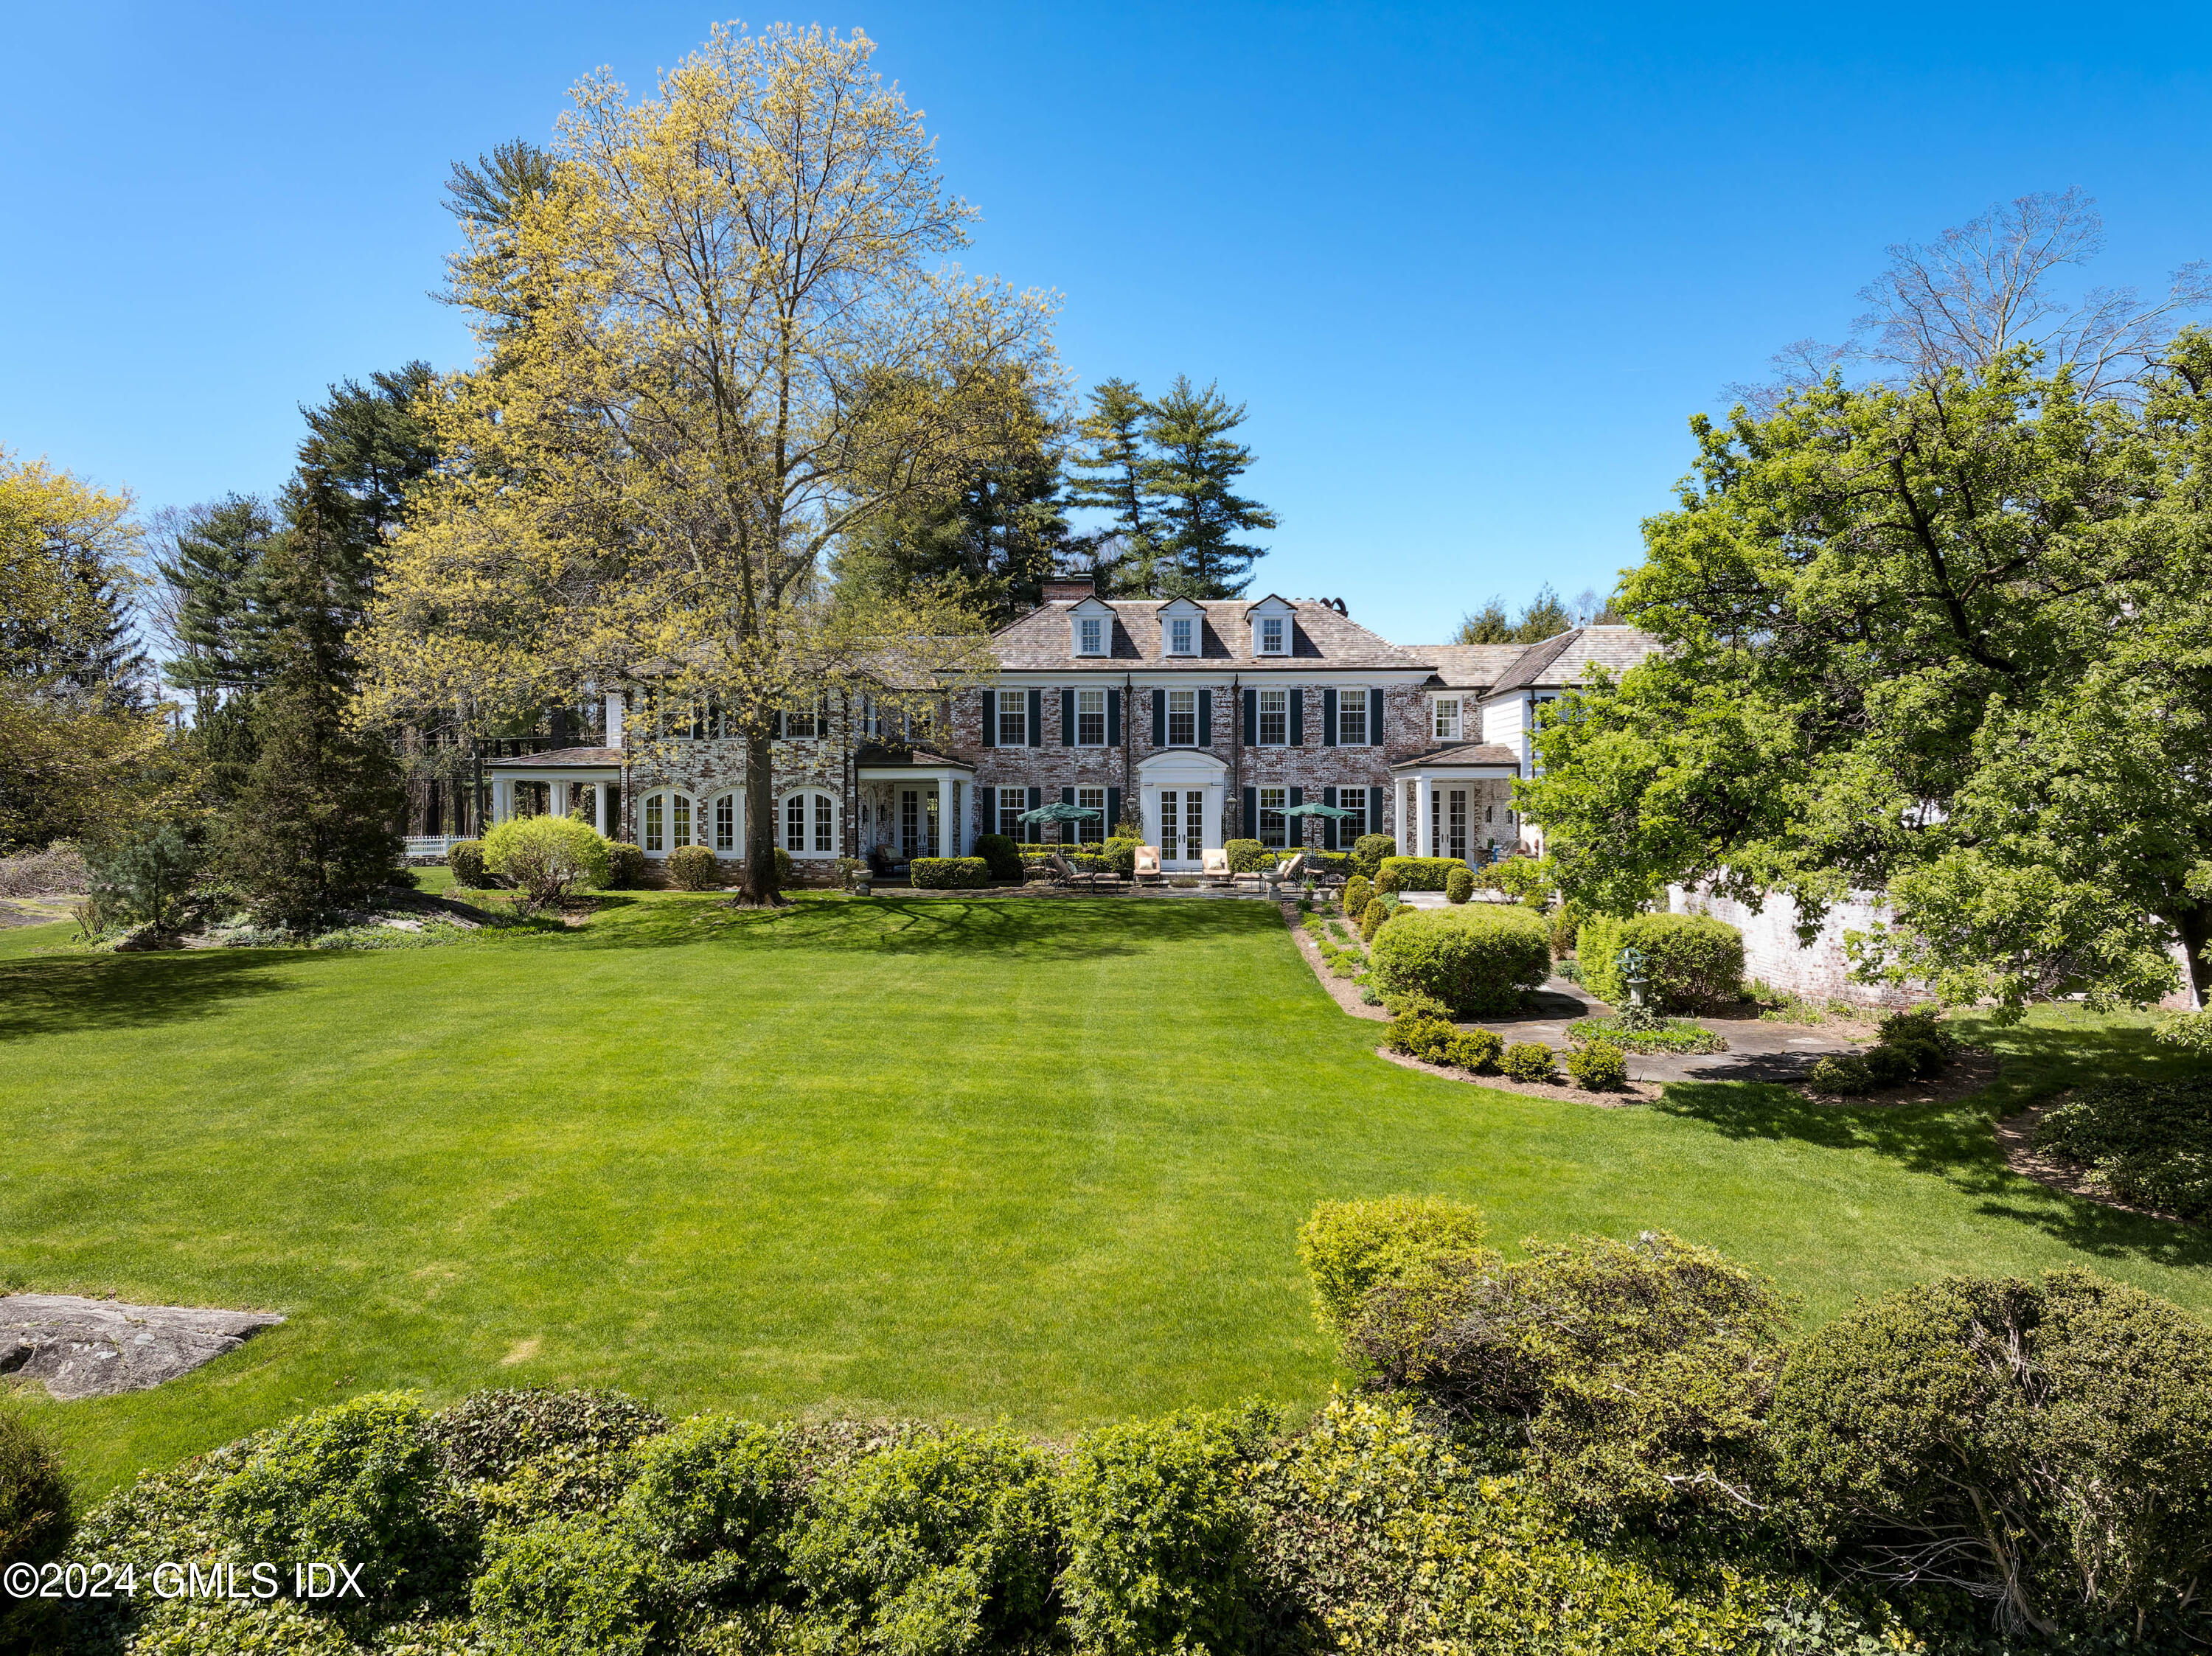 375 Round Hill Road, Greenwich, Connecticut - 7 Bedrooms  
7.5 Bathrooms - 